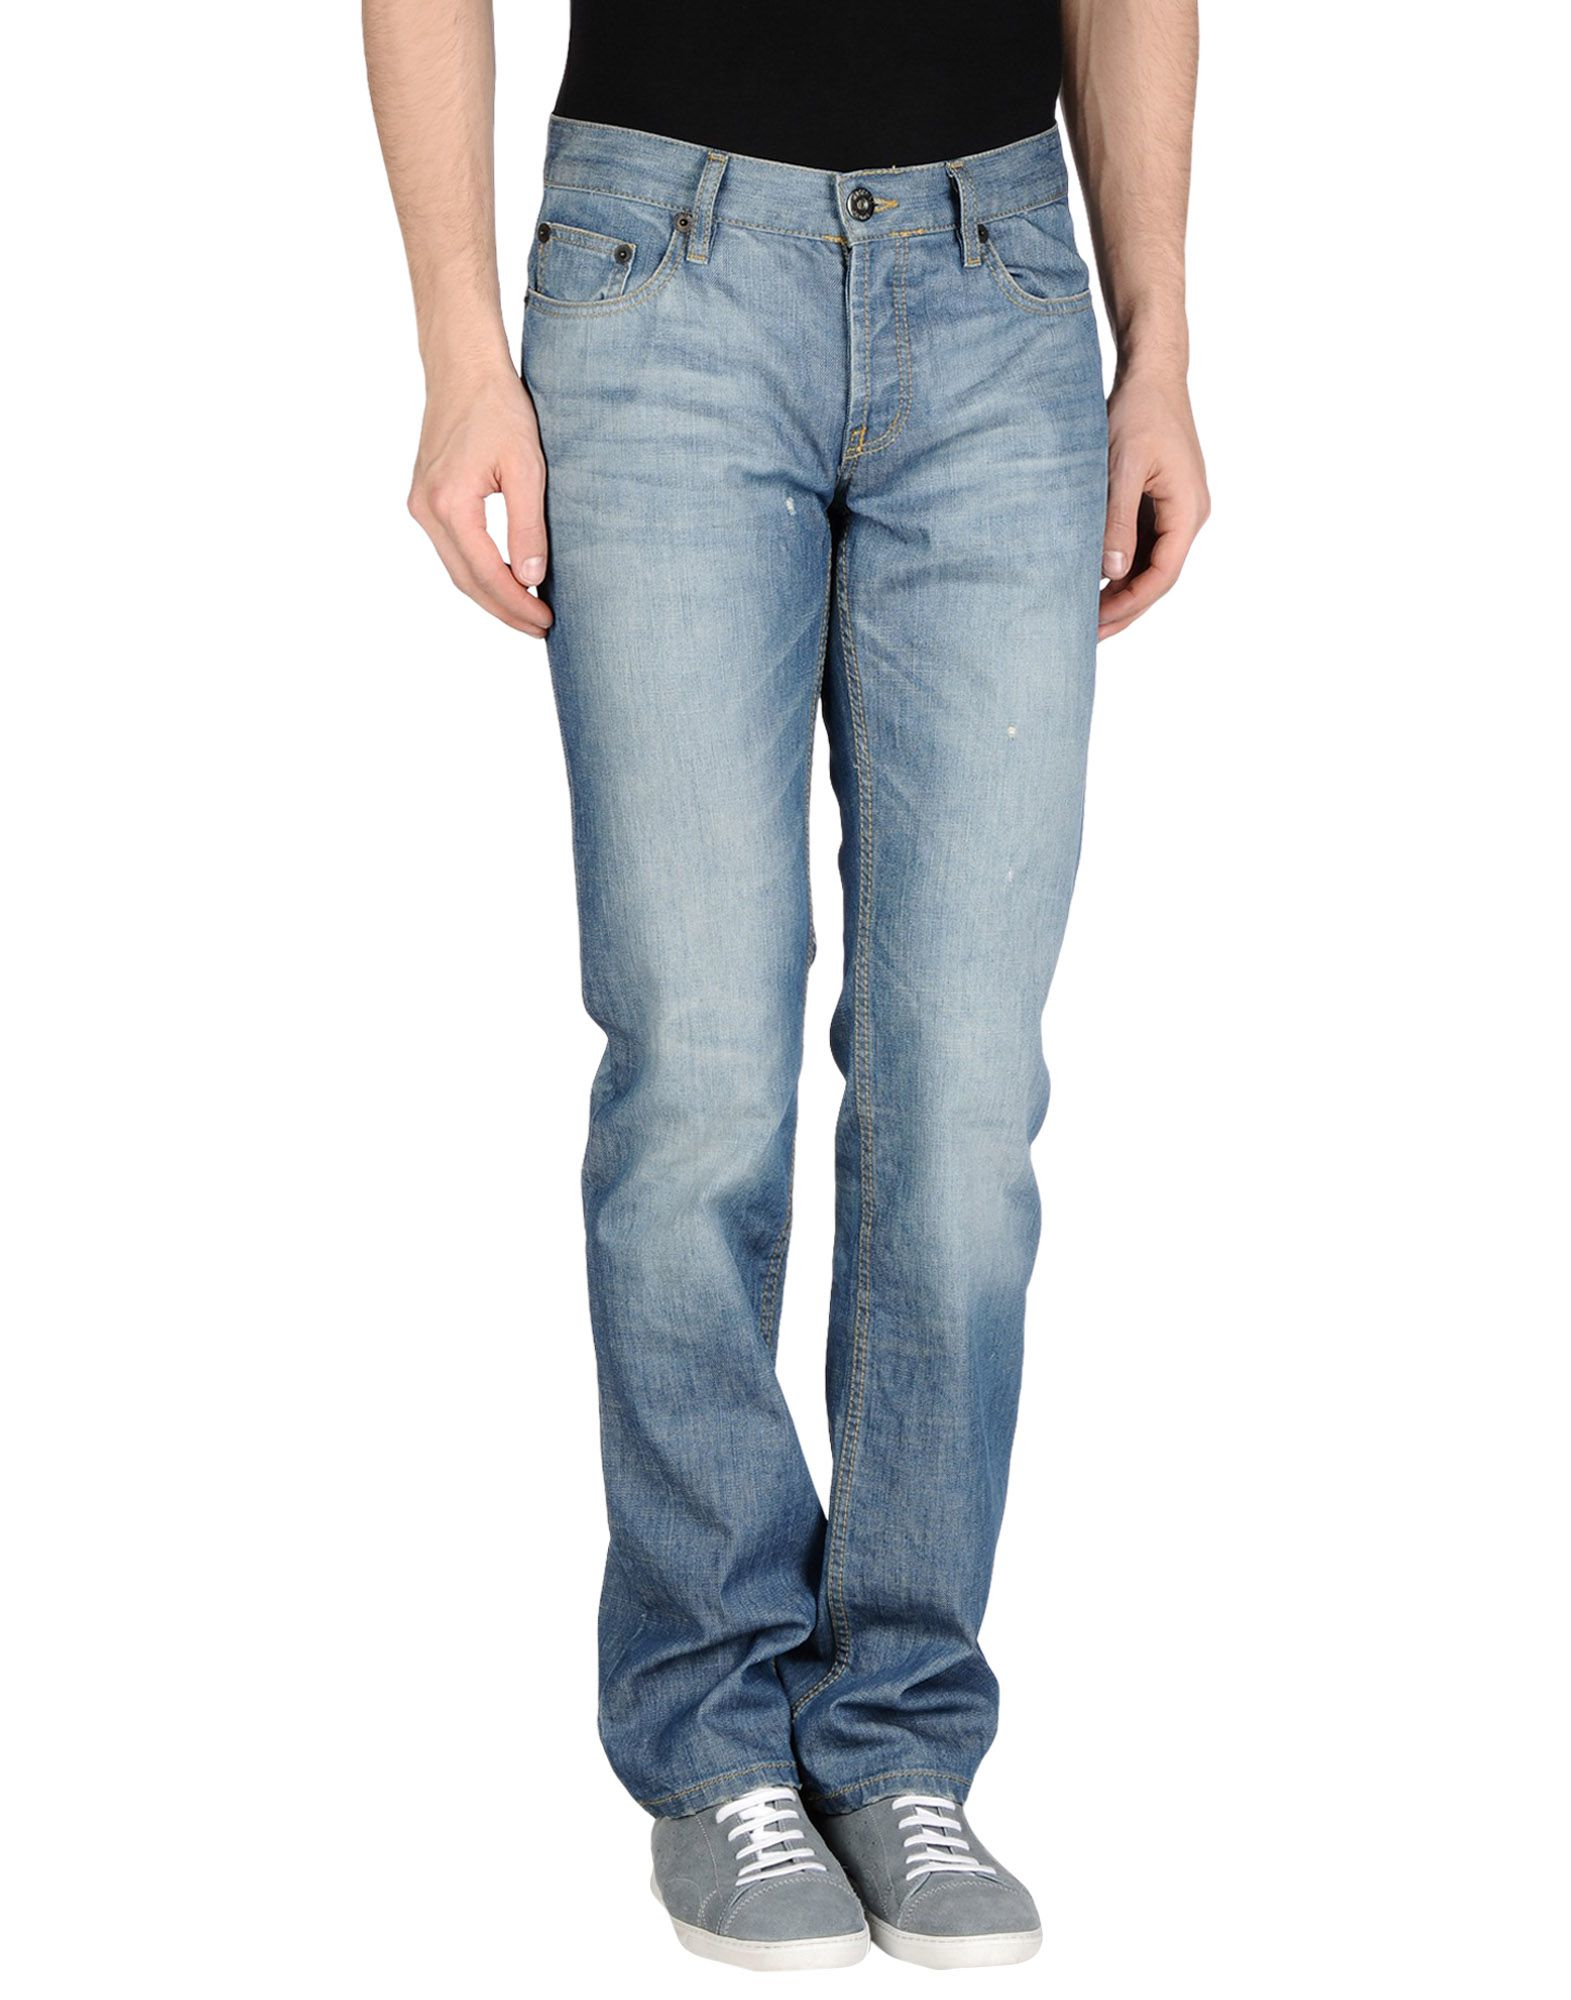 Lyst - Moschino Jeans Denim Trousers in Blue for Men